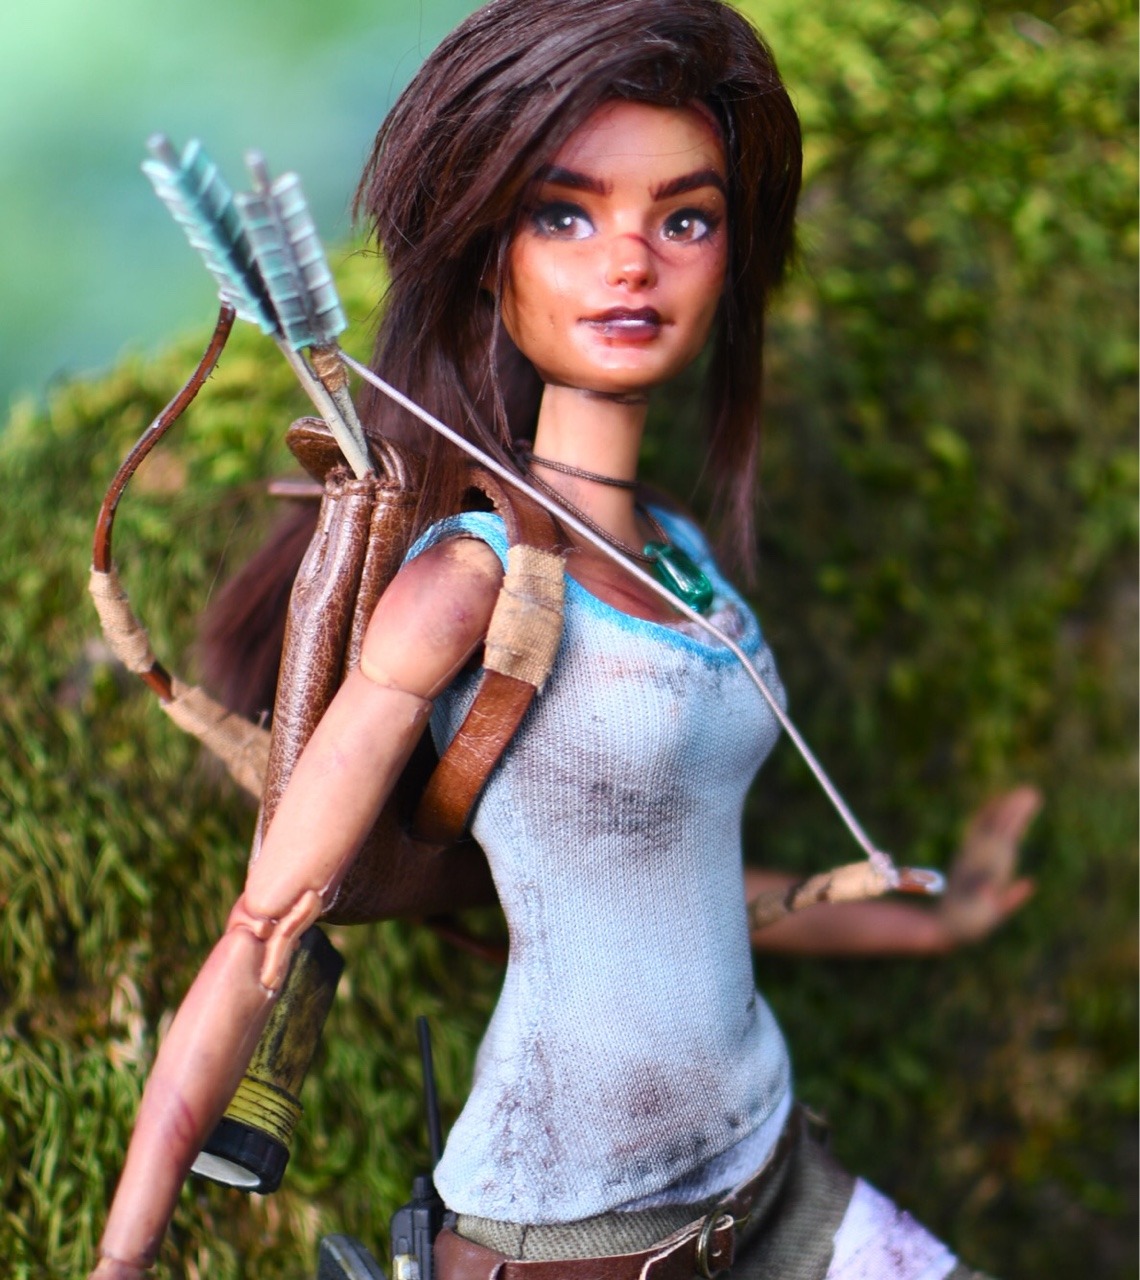 And here is my second @barbie made to move custom!! I got inspired by @hextian ‘s